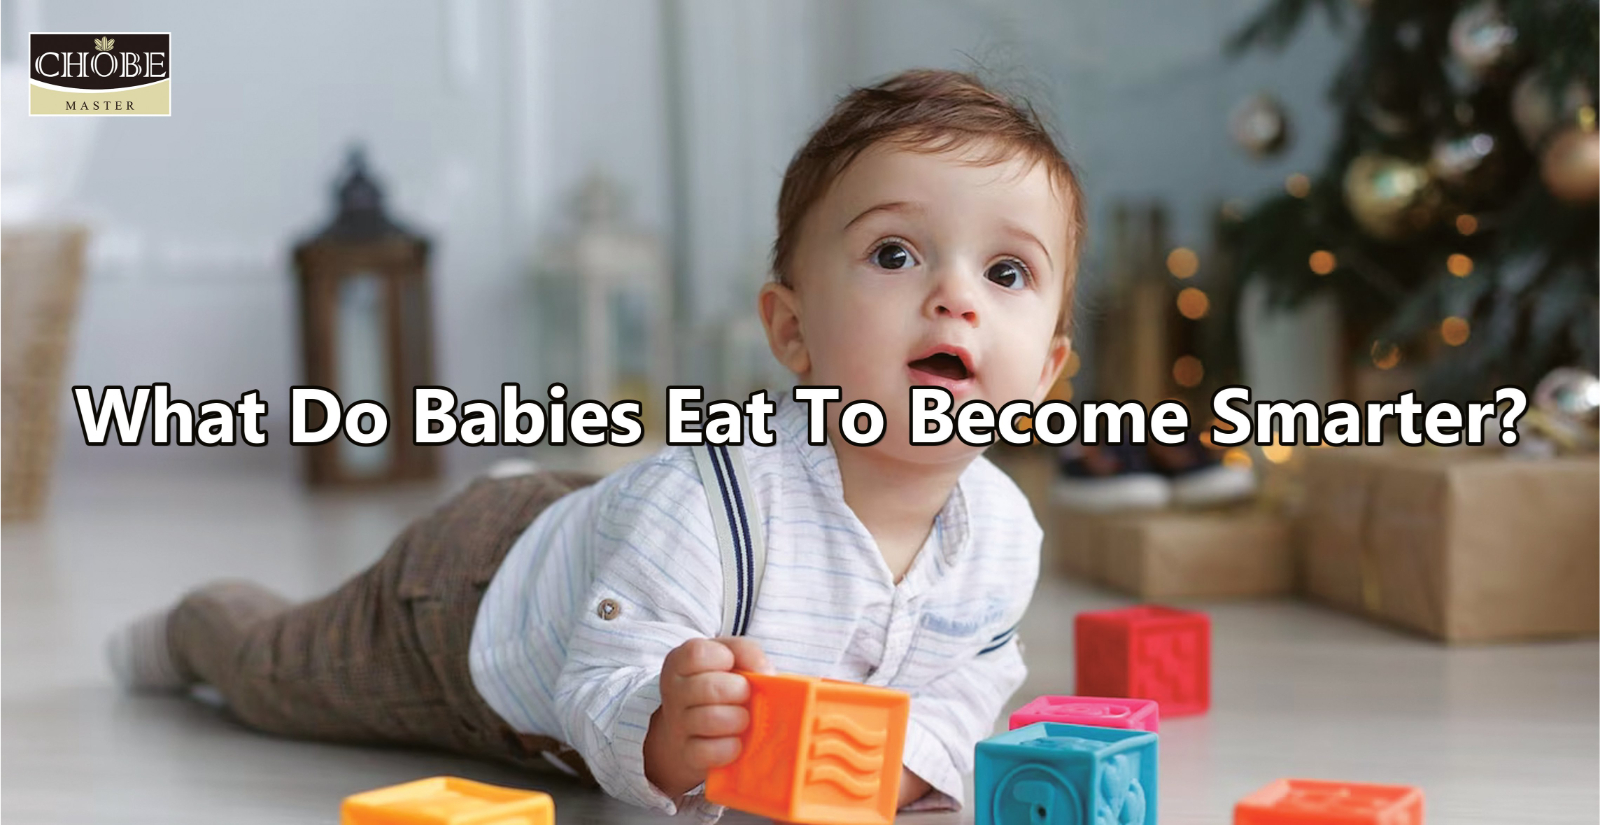 What Do Babies Eat To Become Smarter